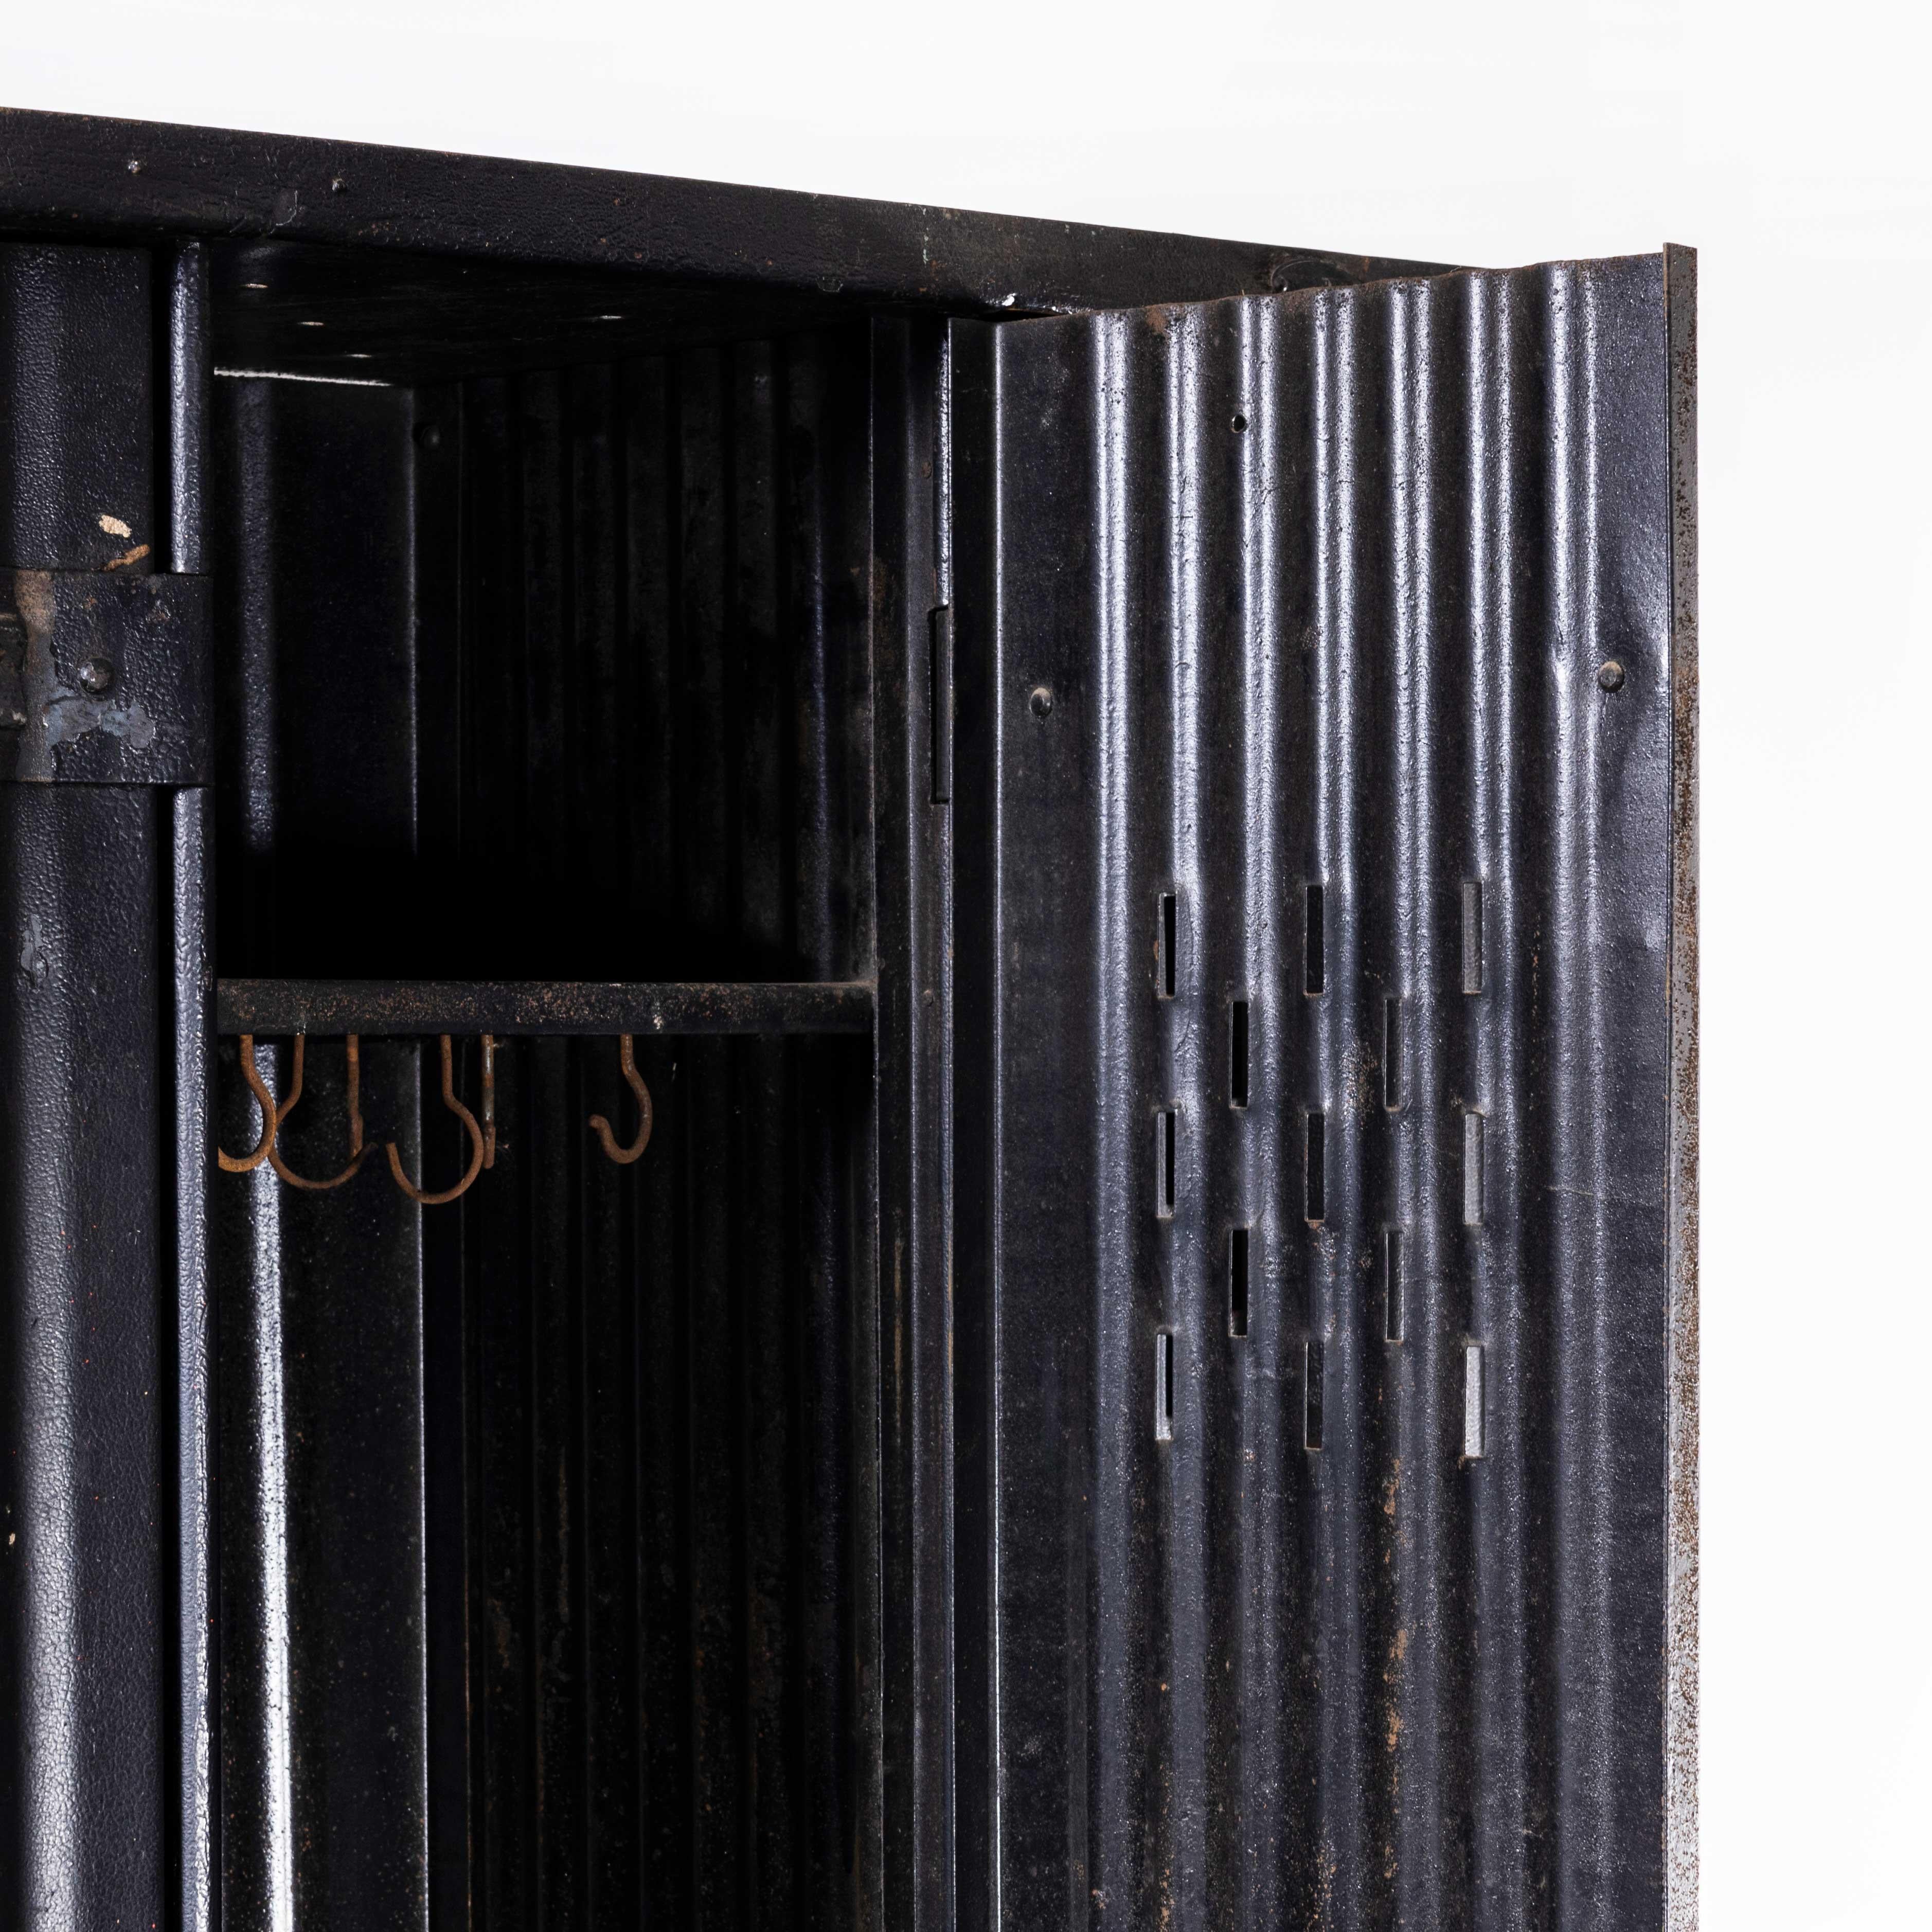 1930s Original Forge de Strasbourg – Strafor – four door locker
1930s Original Forge de Strasbourg – Strafor – four door locker. The Forge de Strasbourg was founded in the South East of France in 1919. They were one of the global pioneers of the